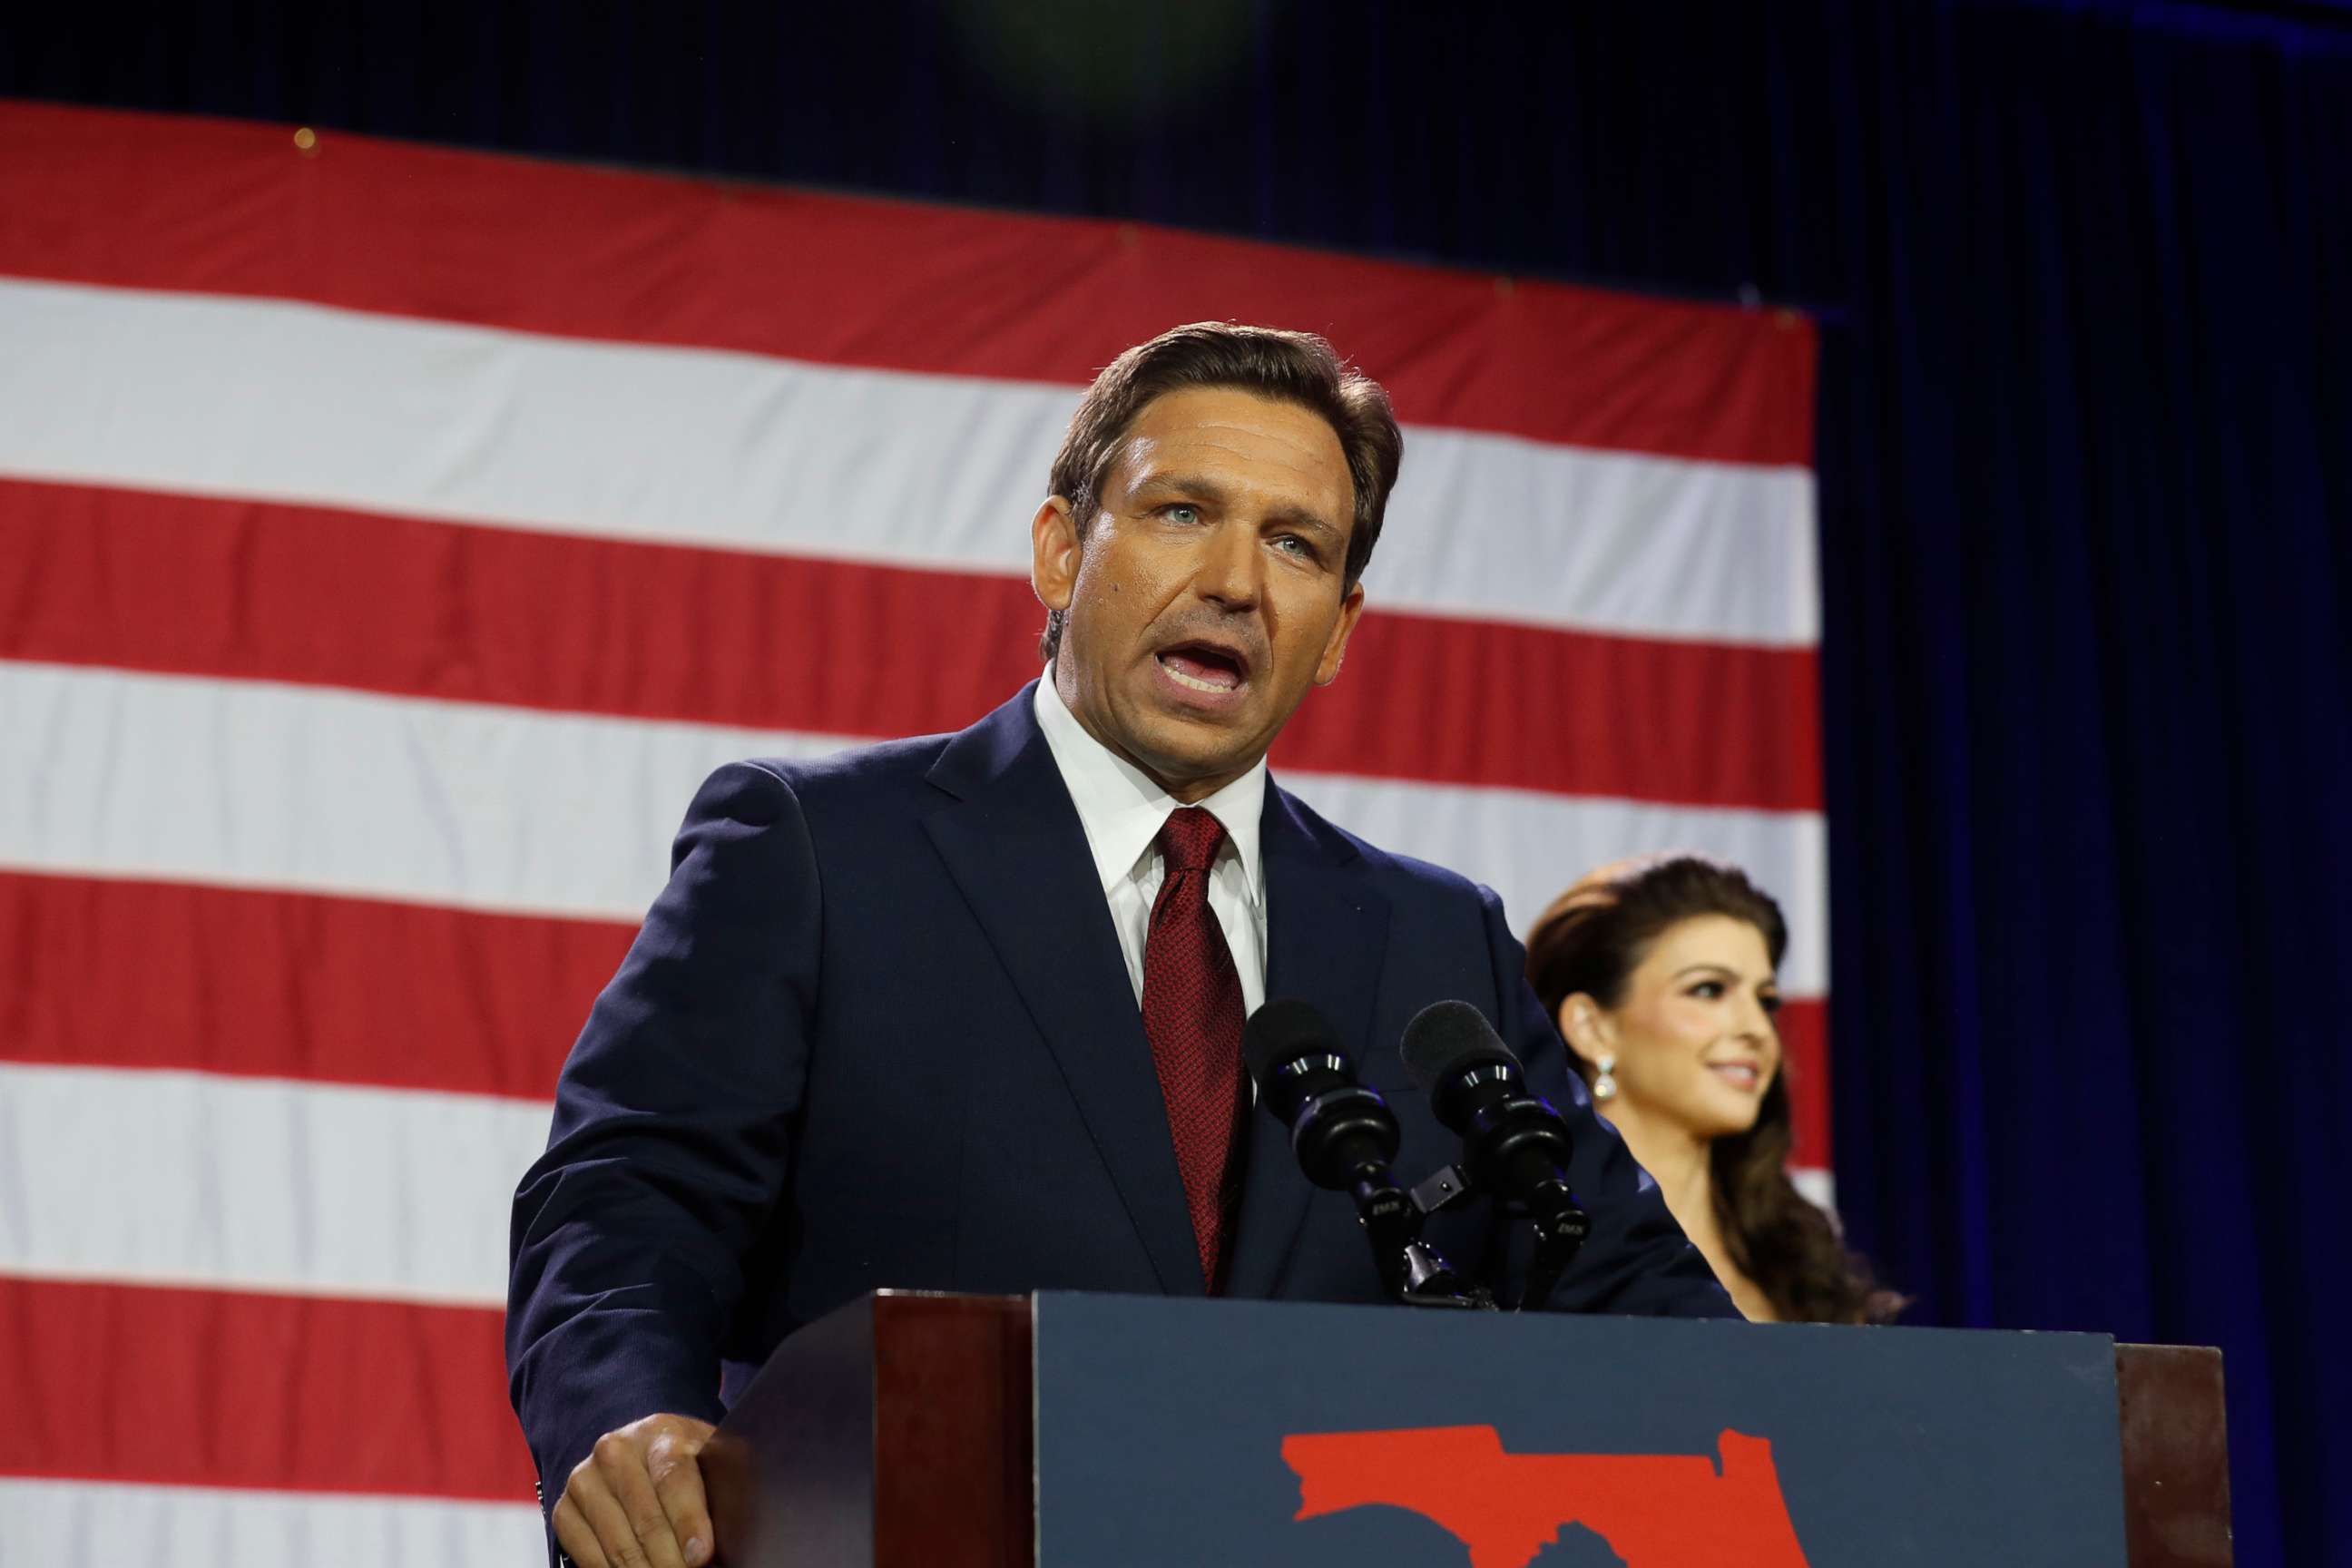 PHOTO: Florida Gov. Ron DeSantis gives a victory speech during his election night watch party at the Tampa Convention Center on Nov. 8, 2022, in Tampa, Fla.